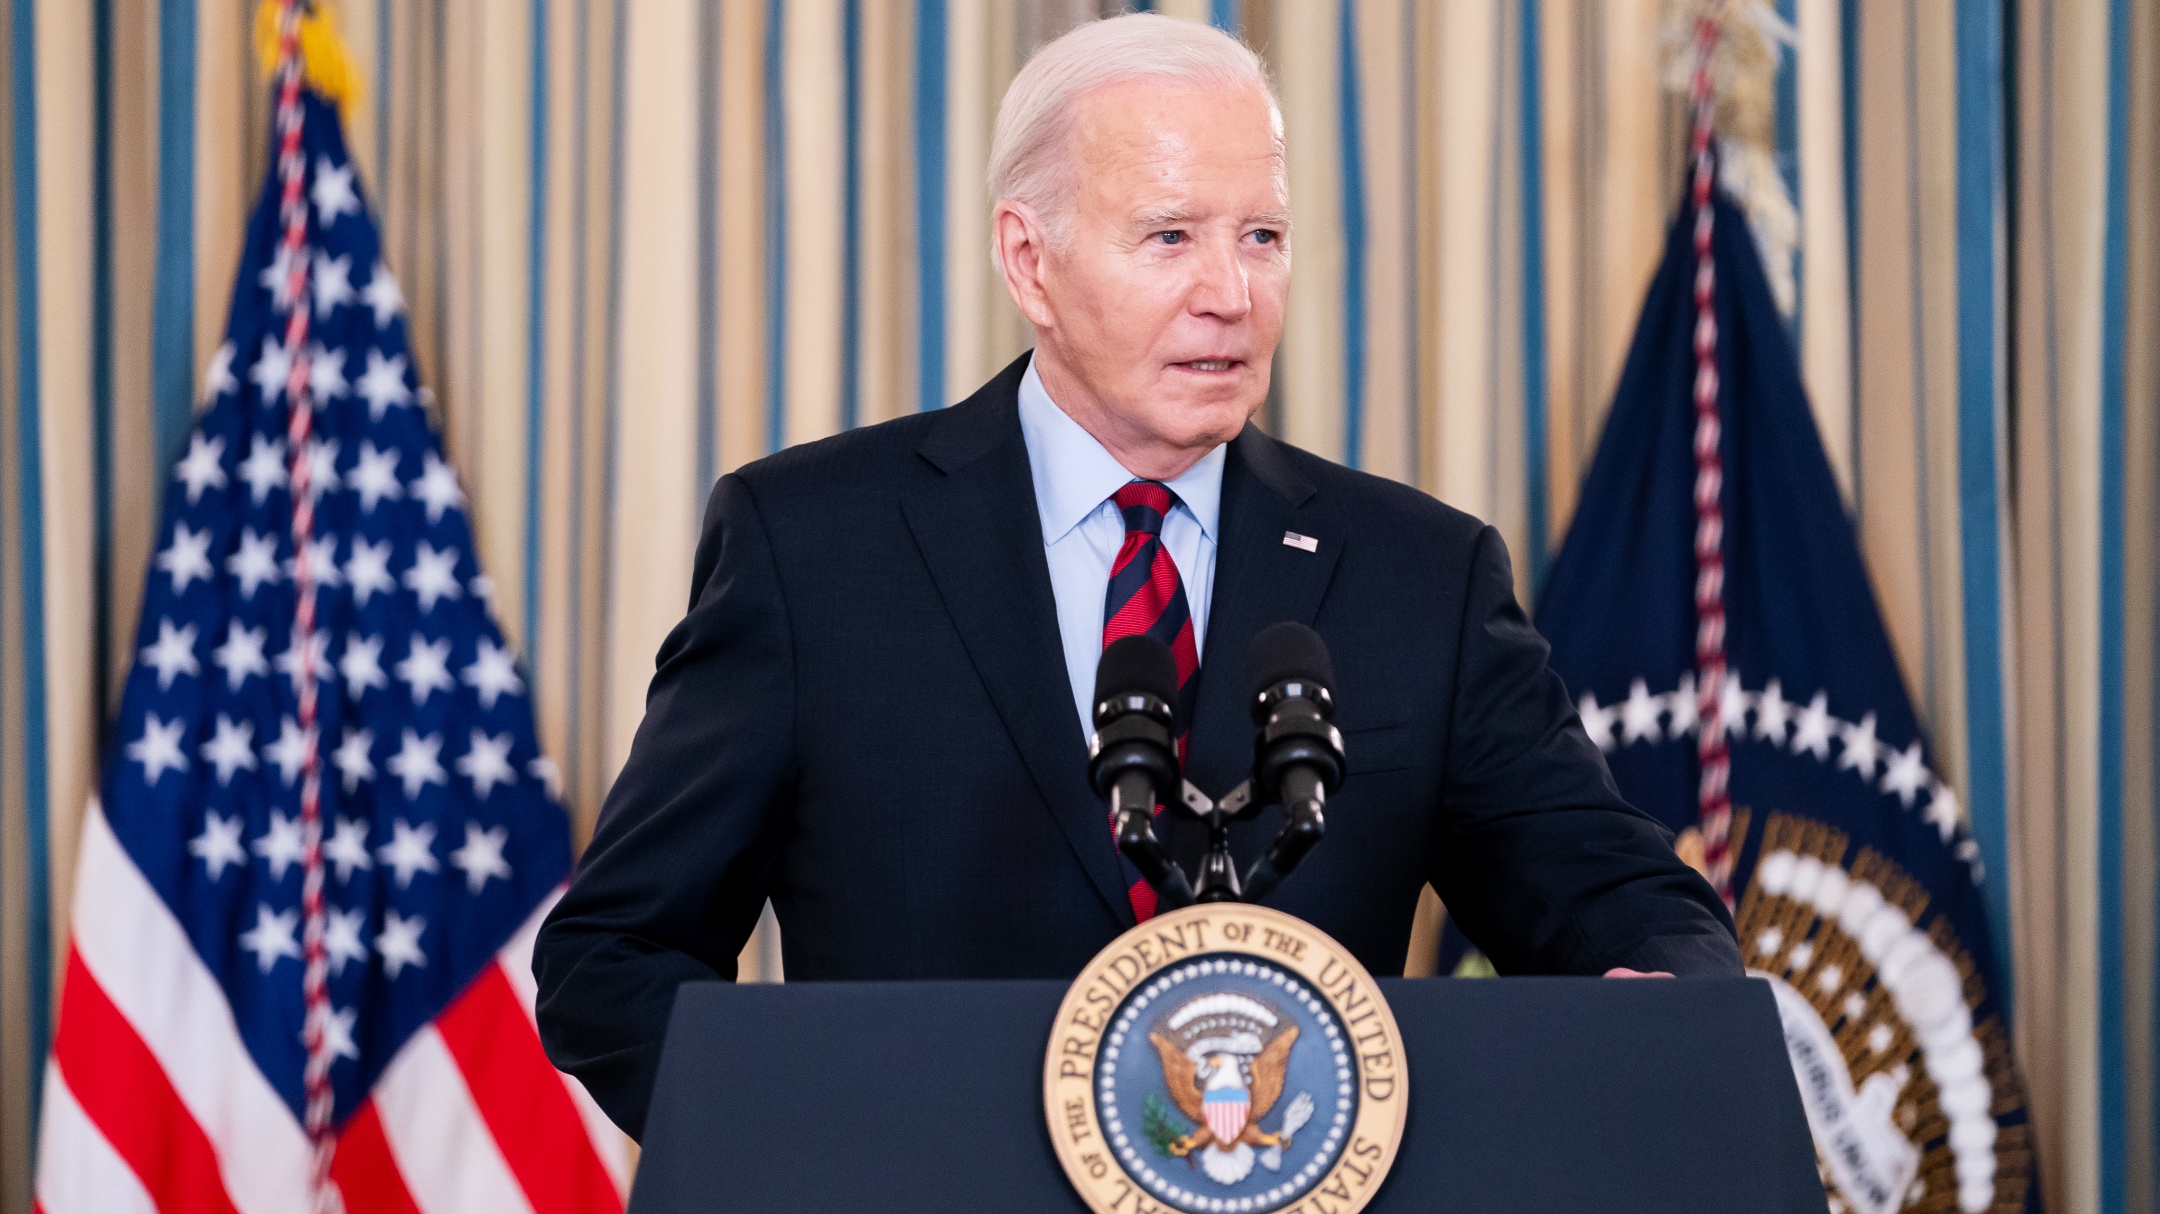 Biden: Israel ‘has not done enough’ to protect aid workers or civilians in Gaza